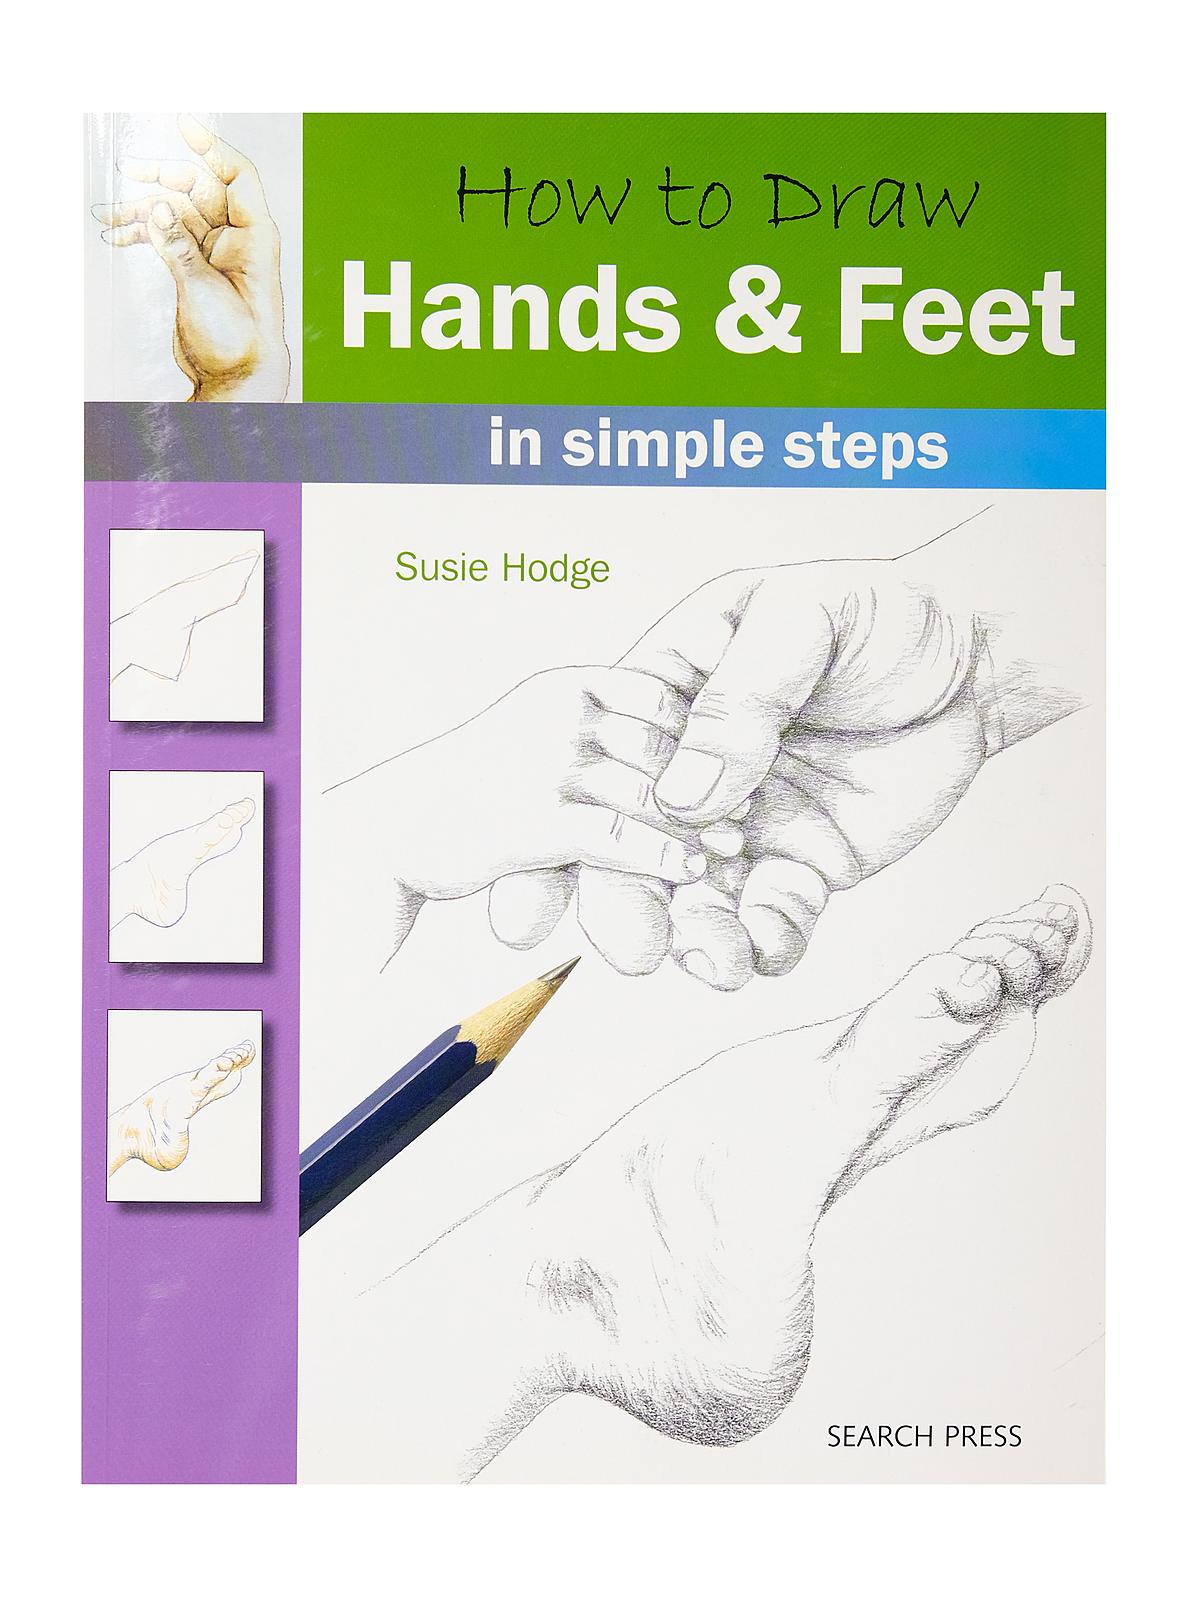 How To Draw Series Hands & Feet